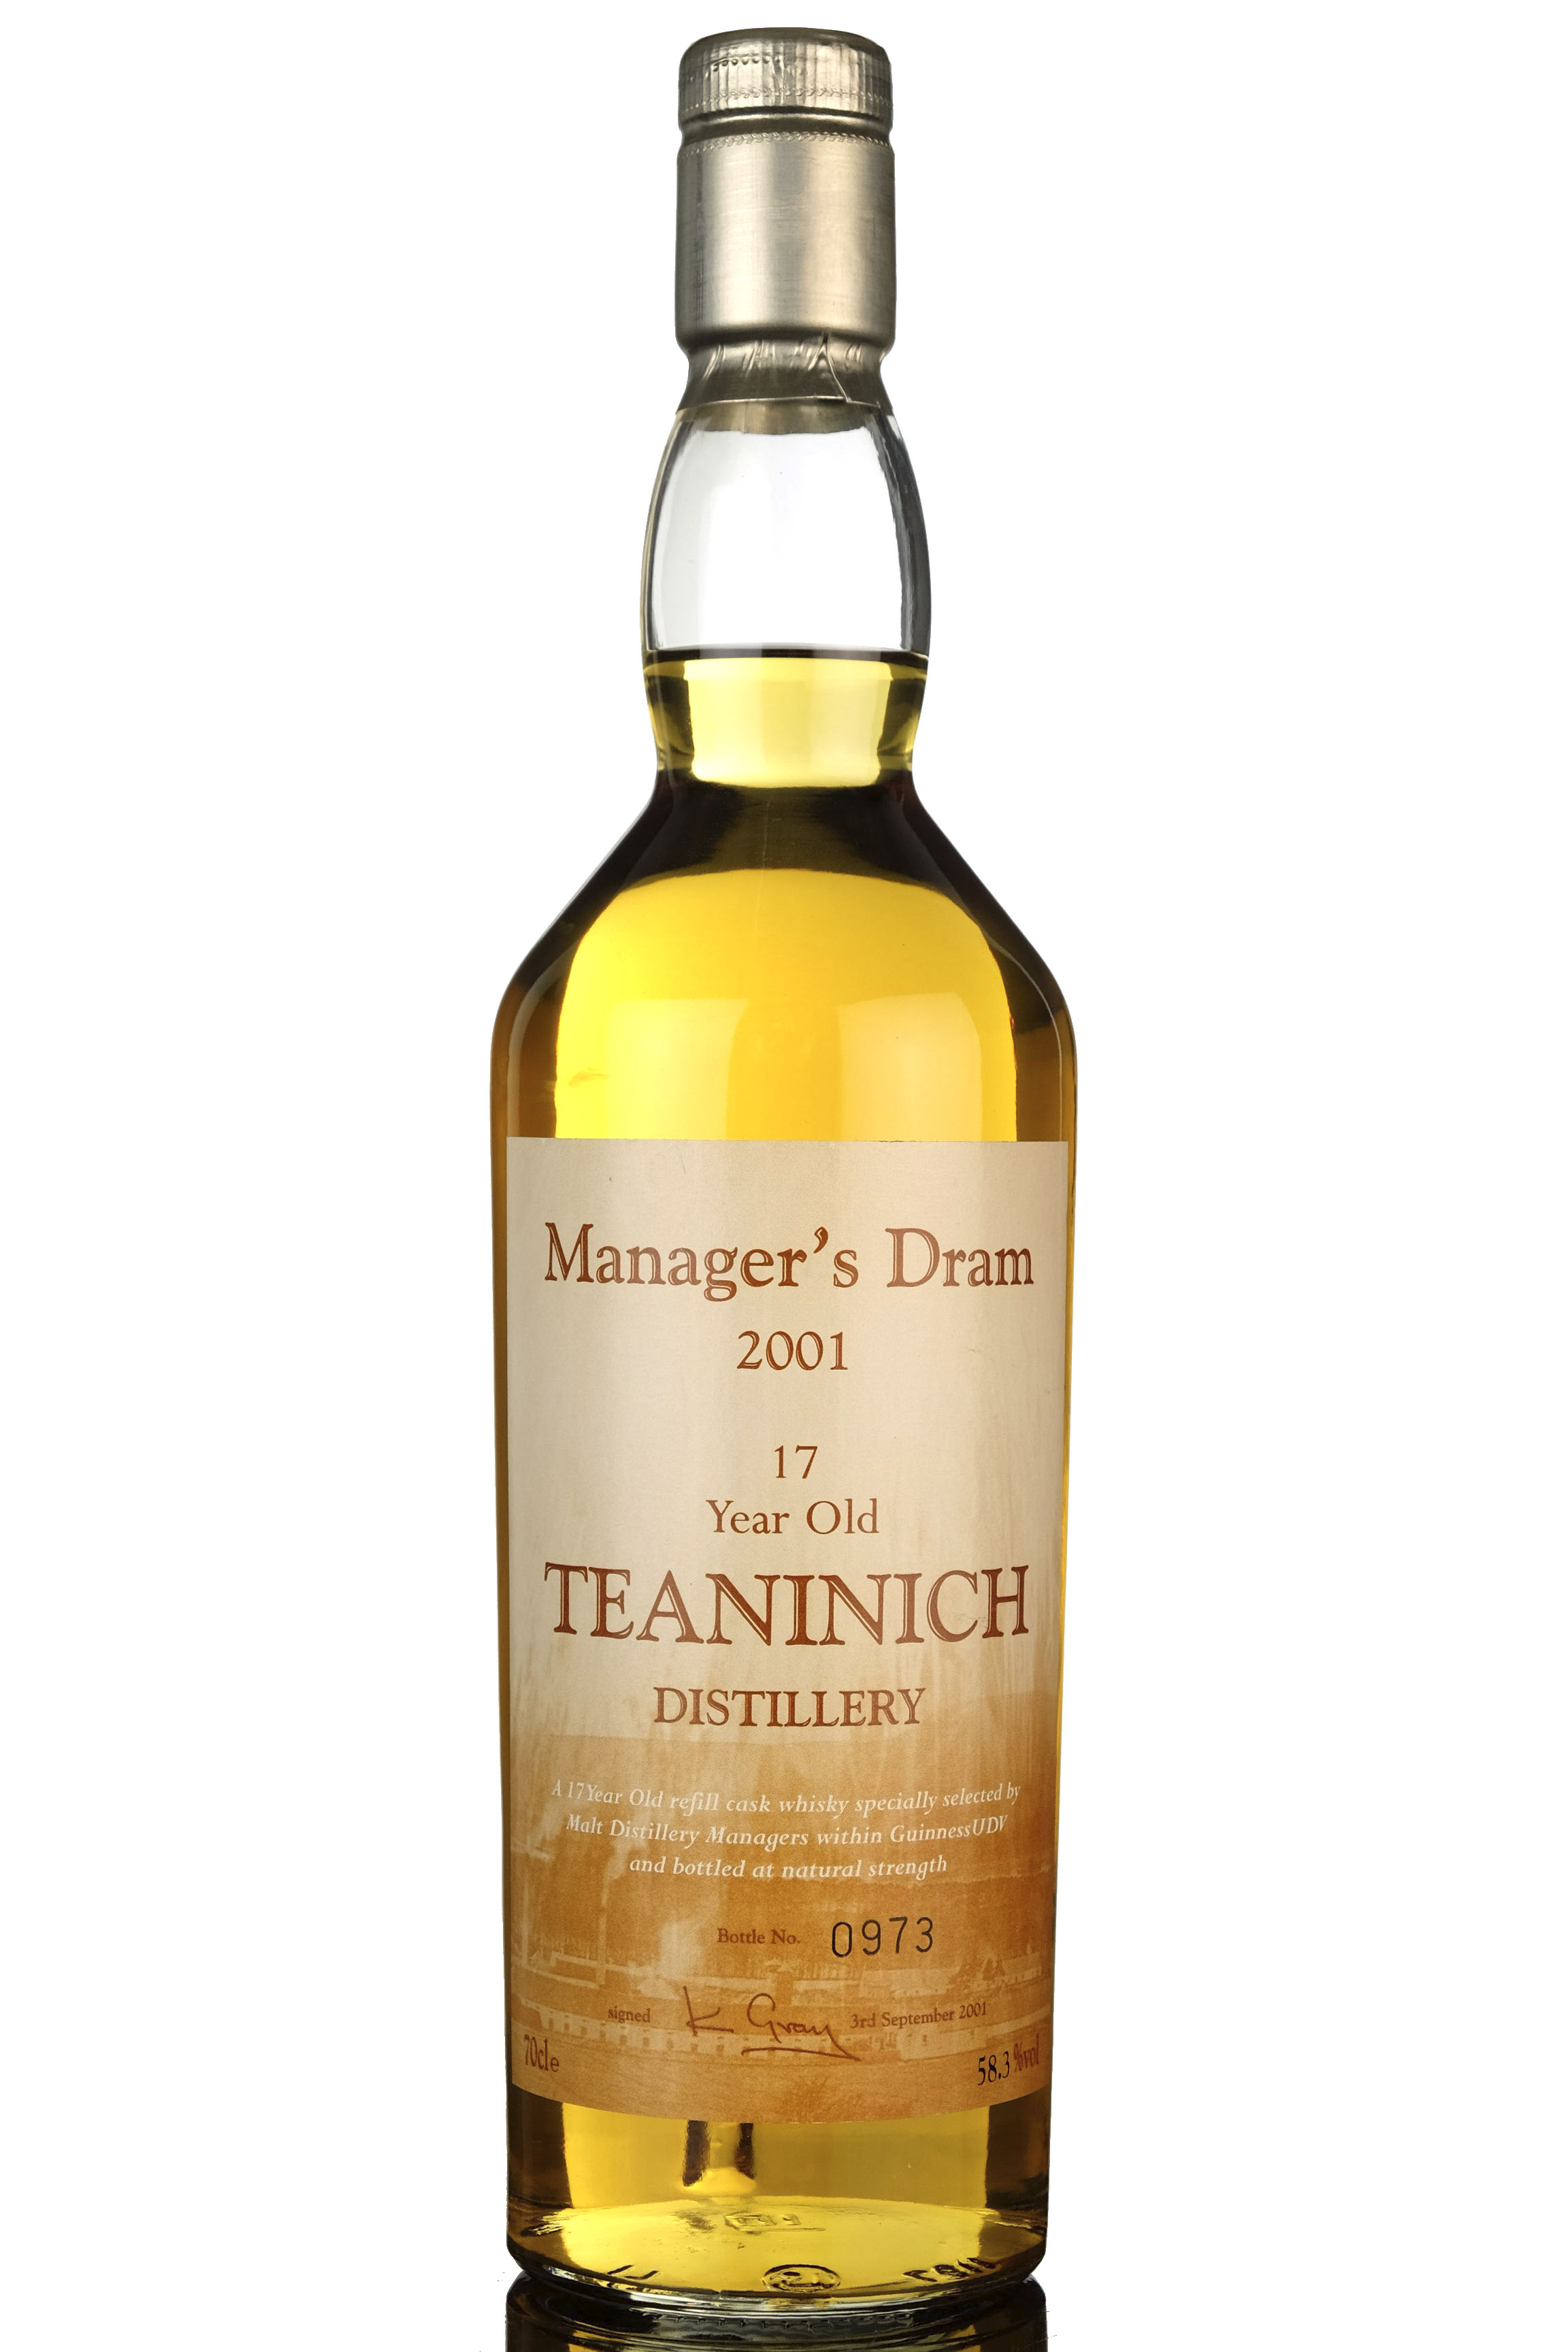 Teaninich 17 Year Old - Managers Dram 2001